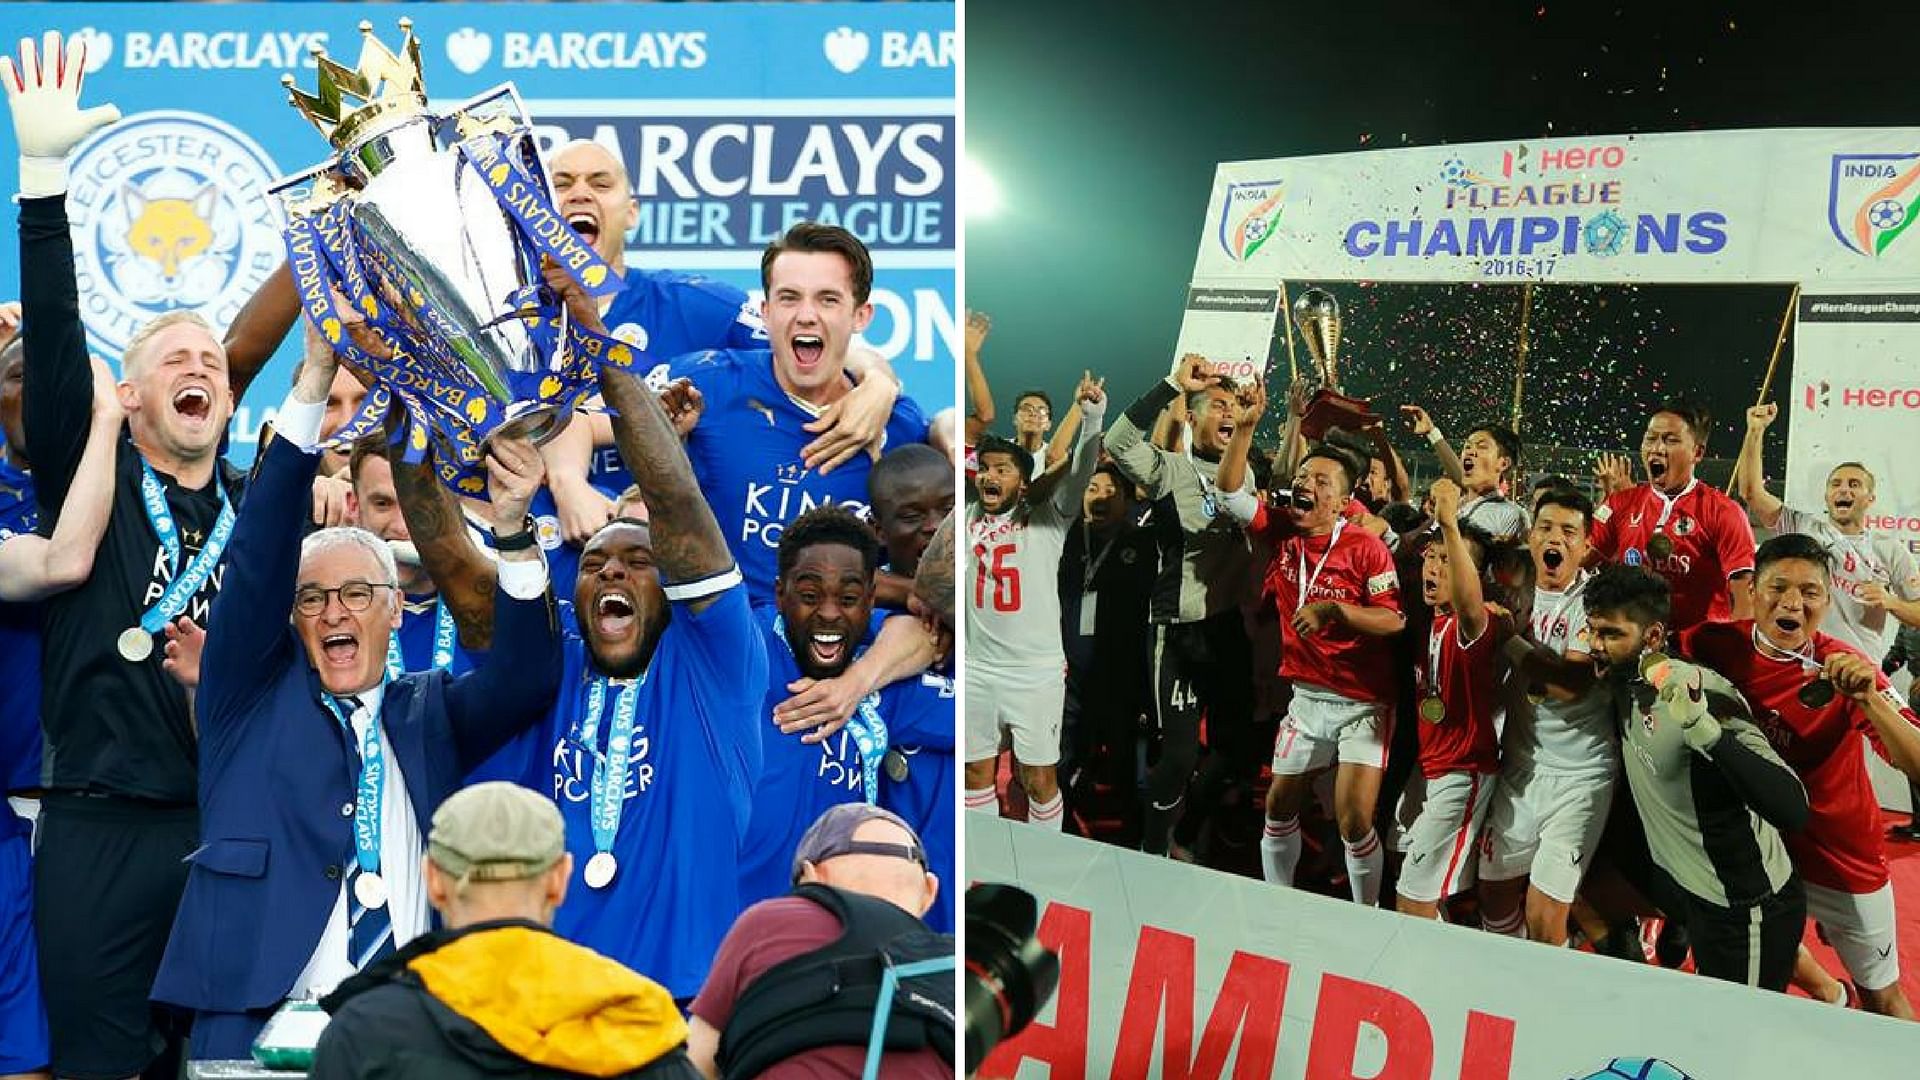 There are uncanny similarities between Leicester City’s 2015-16 Premier League triumph and Aizawl FC’s 2017 I-League victory. (Photo Courtesy: Facebook/<a href="https://www.facebook.com/aizawl.fc/">@aizawl.fc</a>/<a href="https://www.facebook.com/lcfc/">@lcfc</a>)